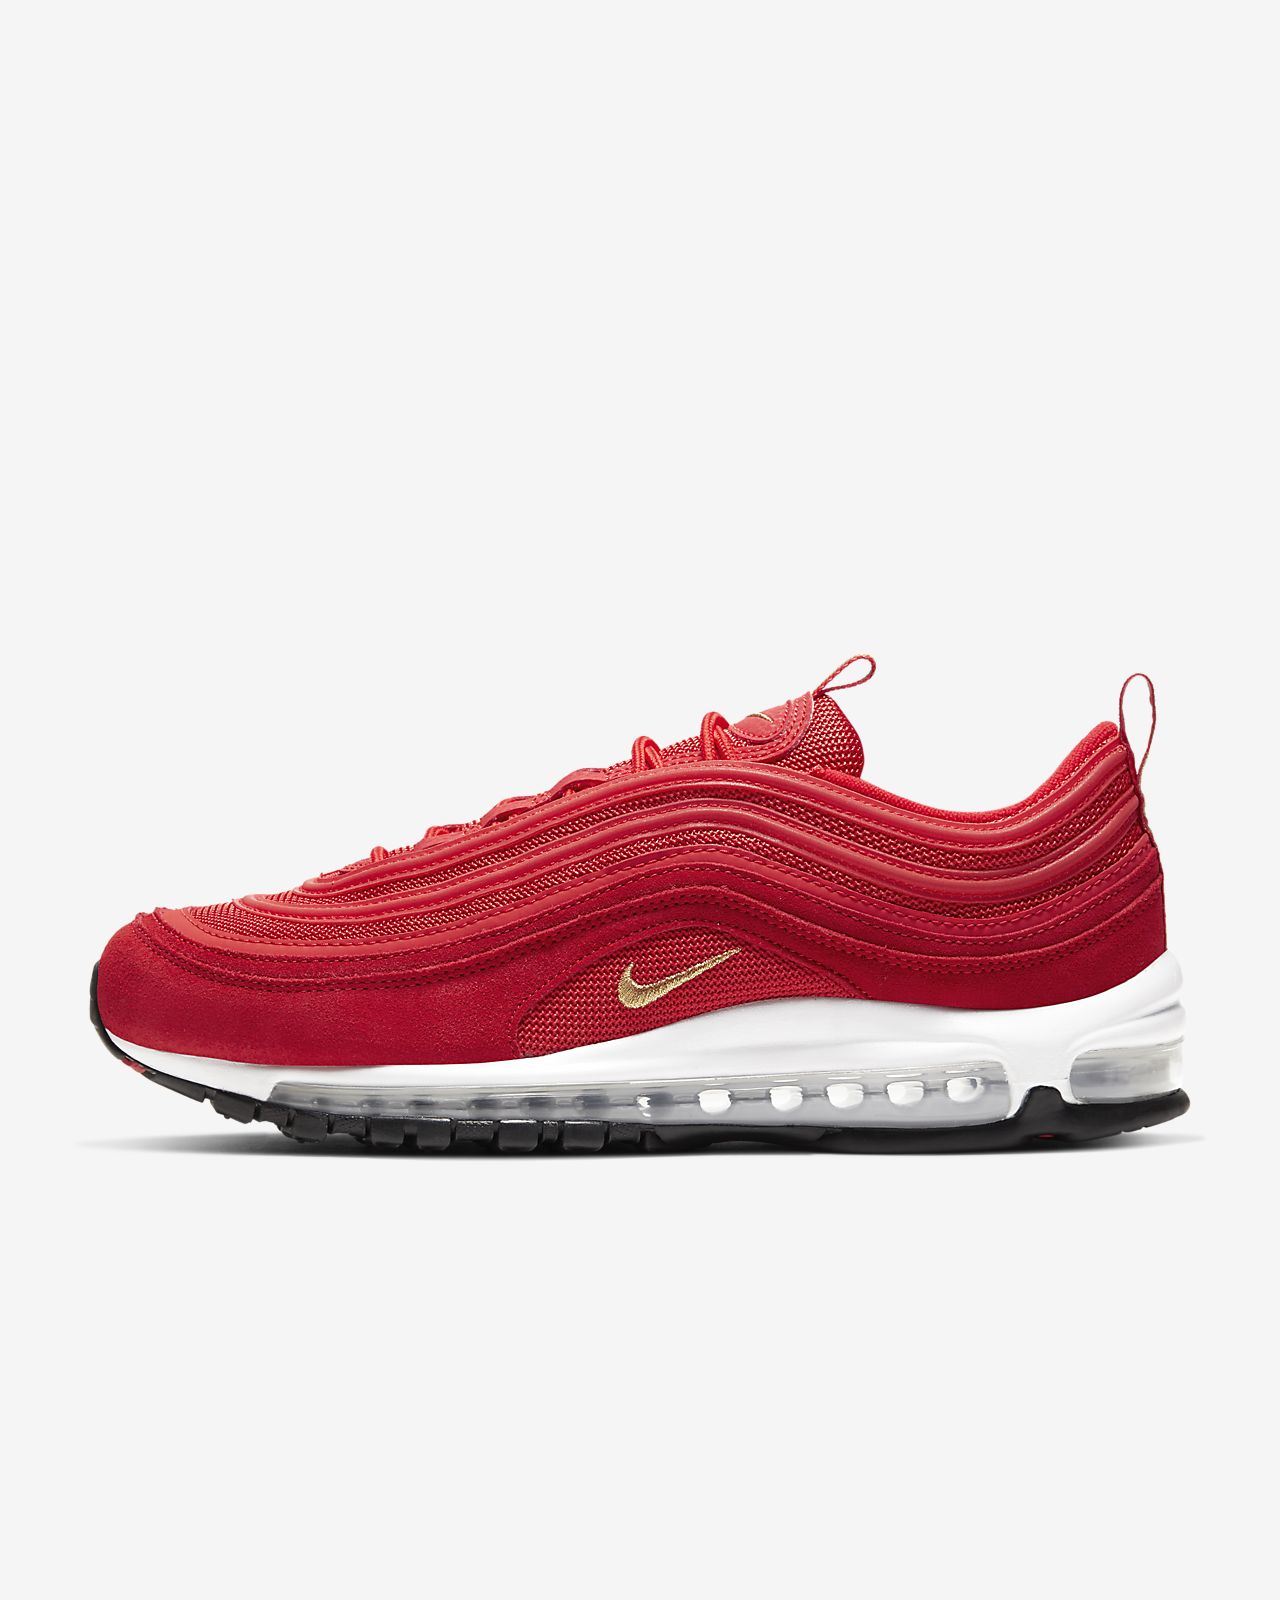 all red 97 air max